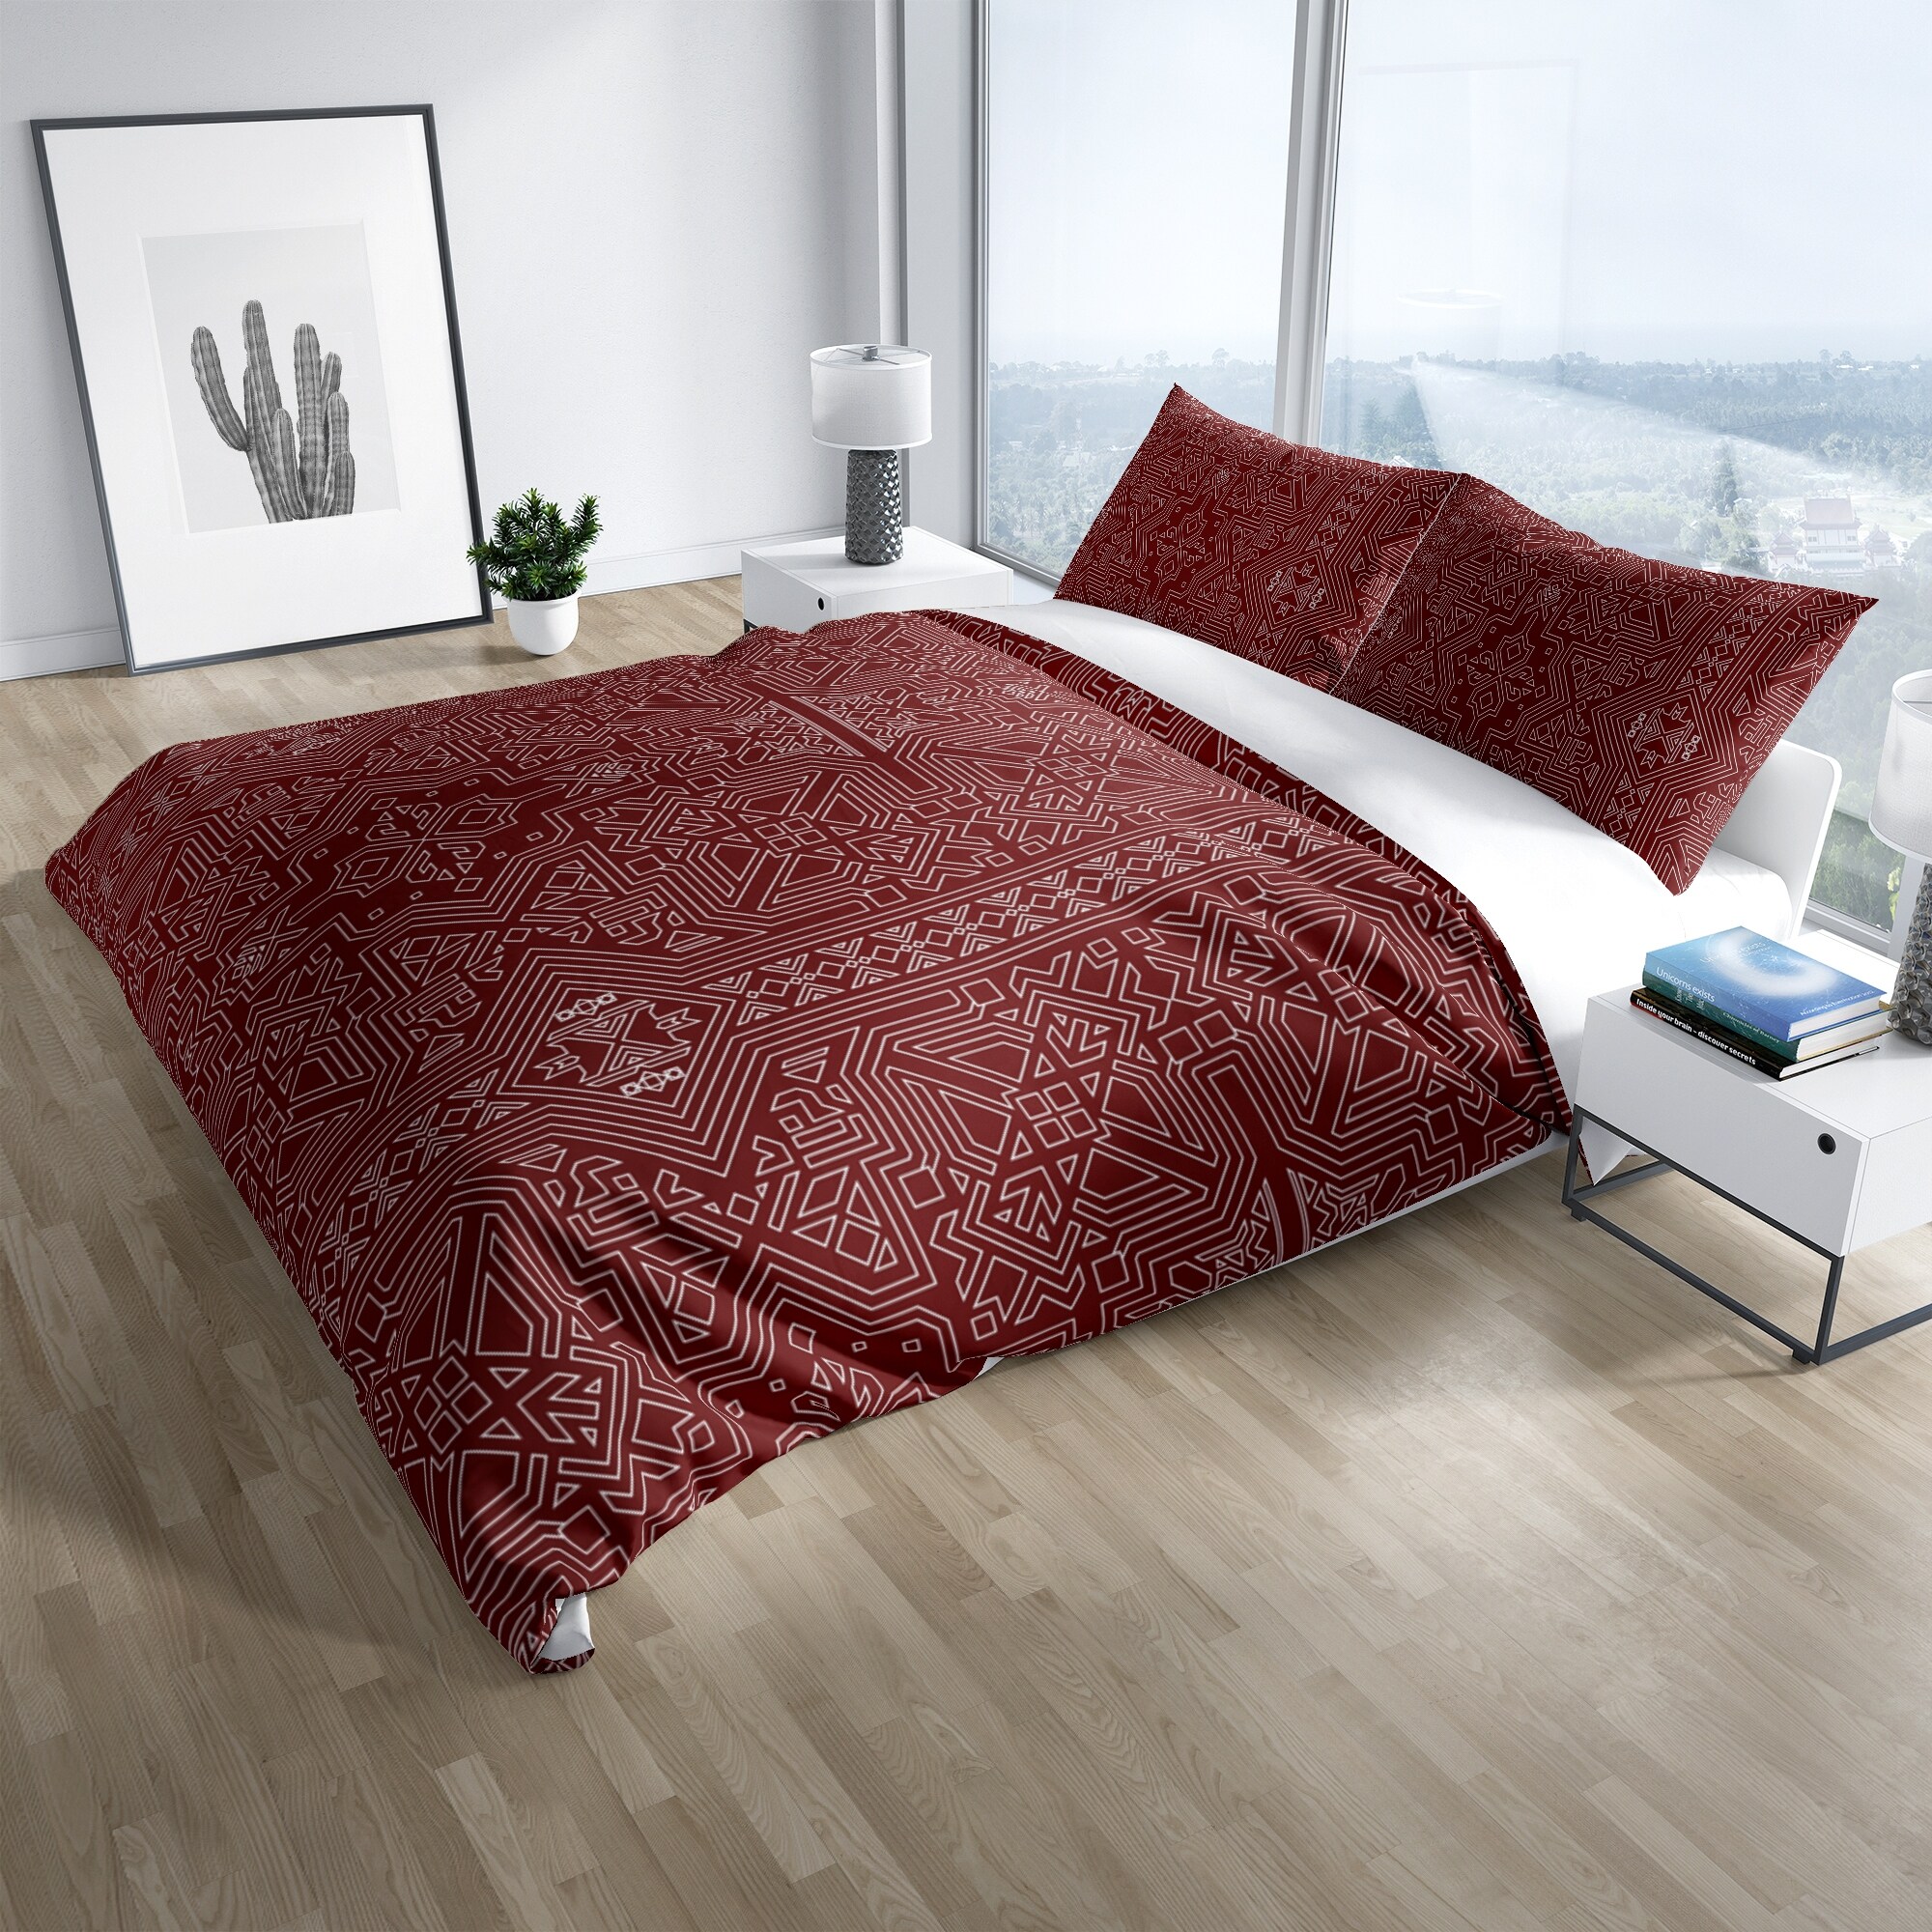 https://ak1.ostkcdn.com/images/products/is/images/direct/1bfbfa0e2d5a6332b215c761b5a1137a13904c02/SULTANATE-BURGUNDY-Duvet-Cover-By-Kavka-Designs.jpg